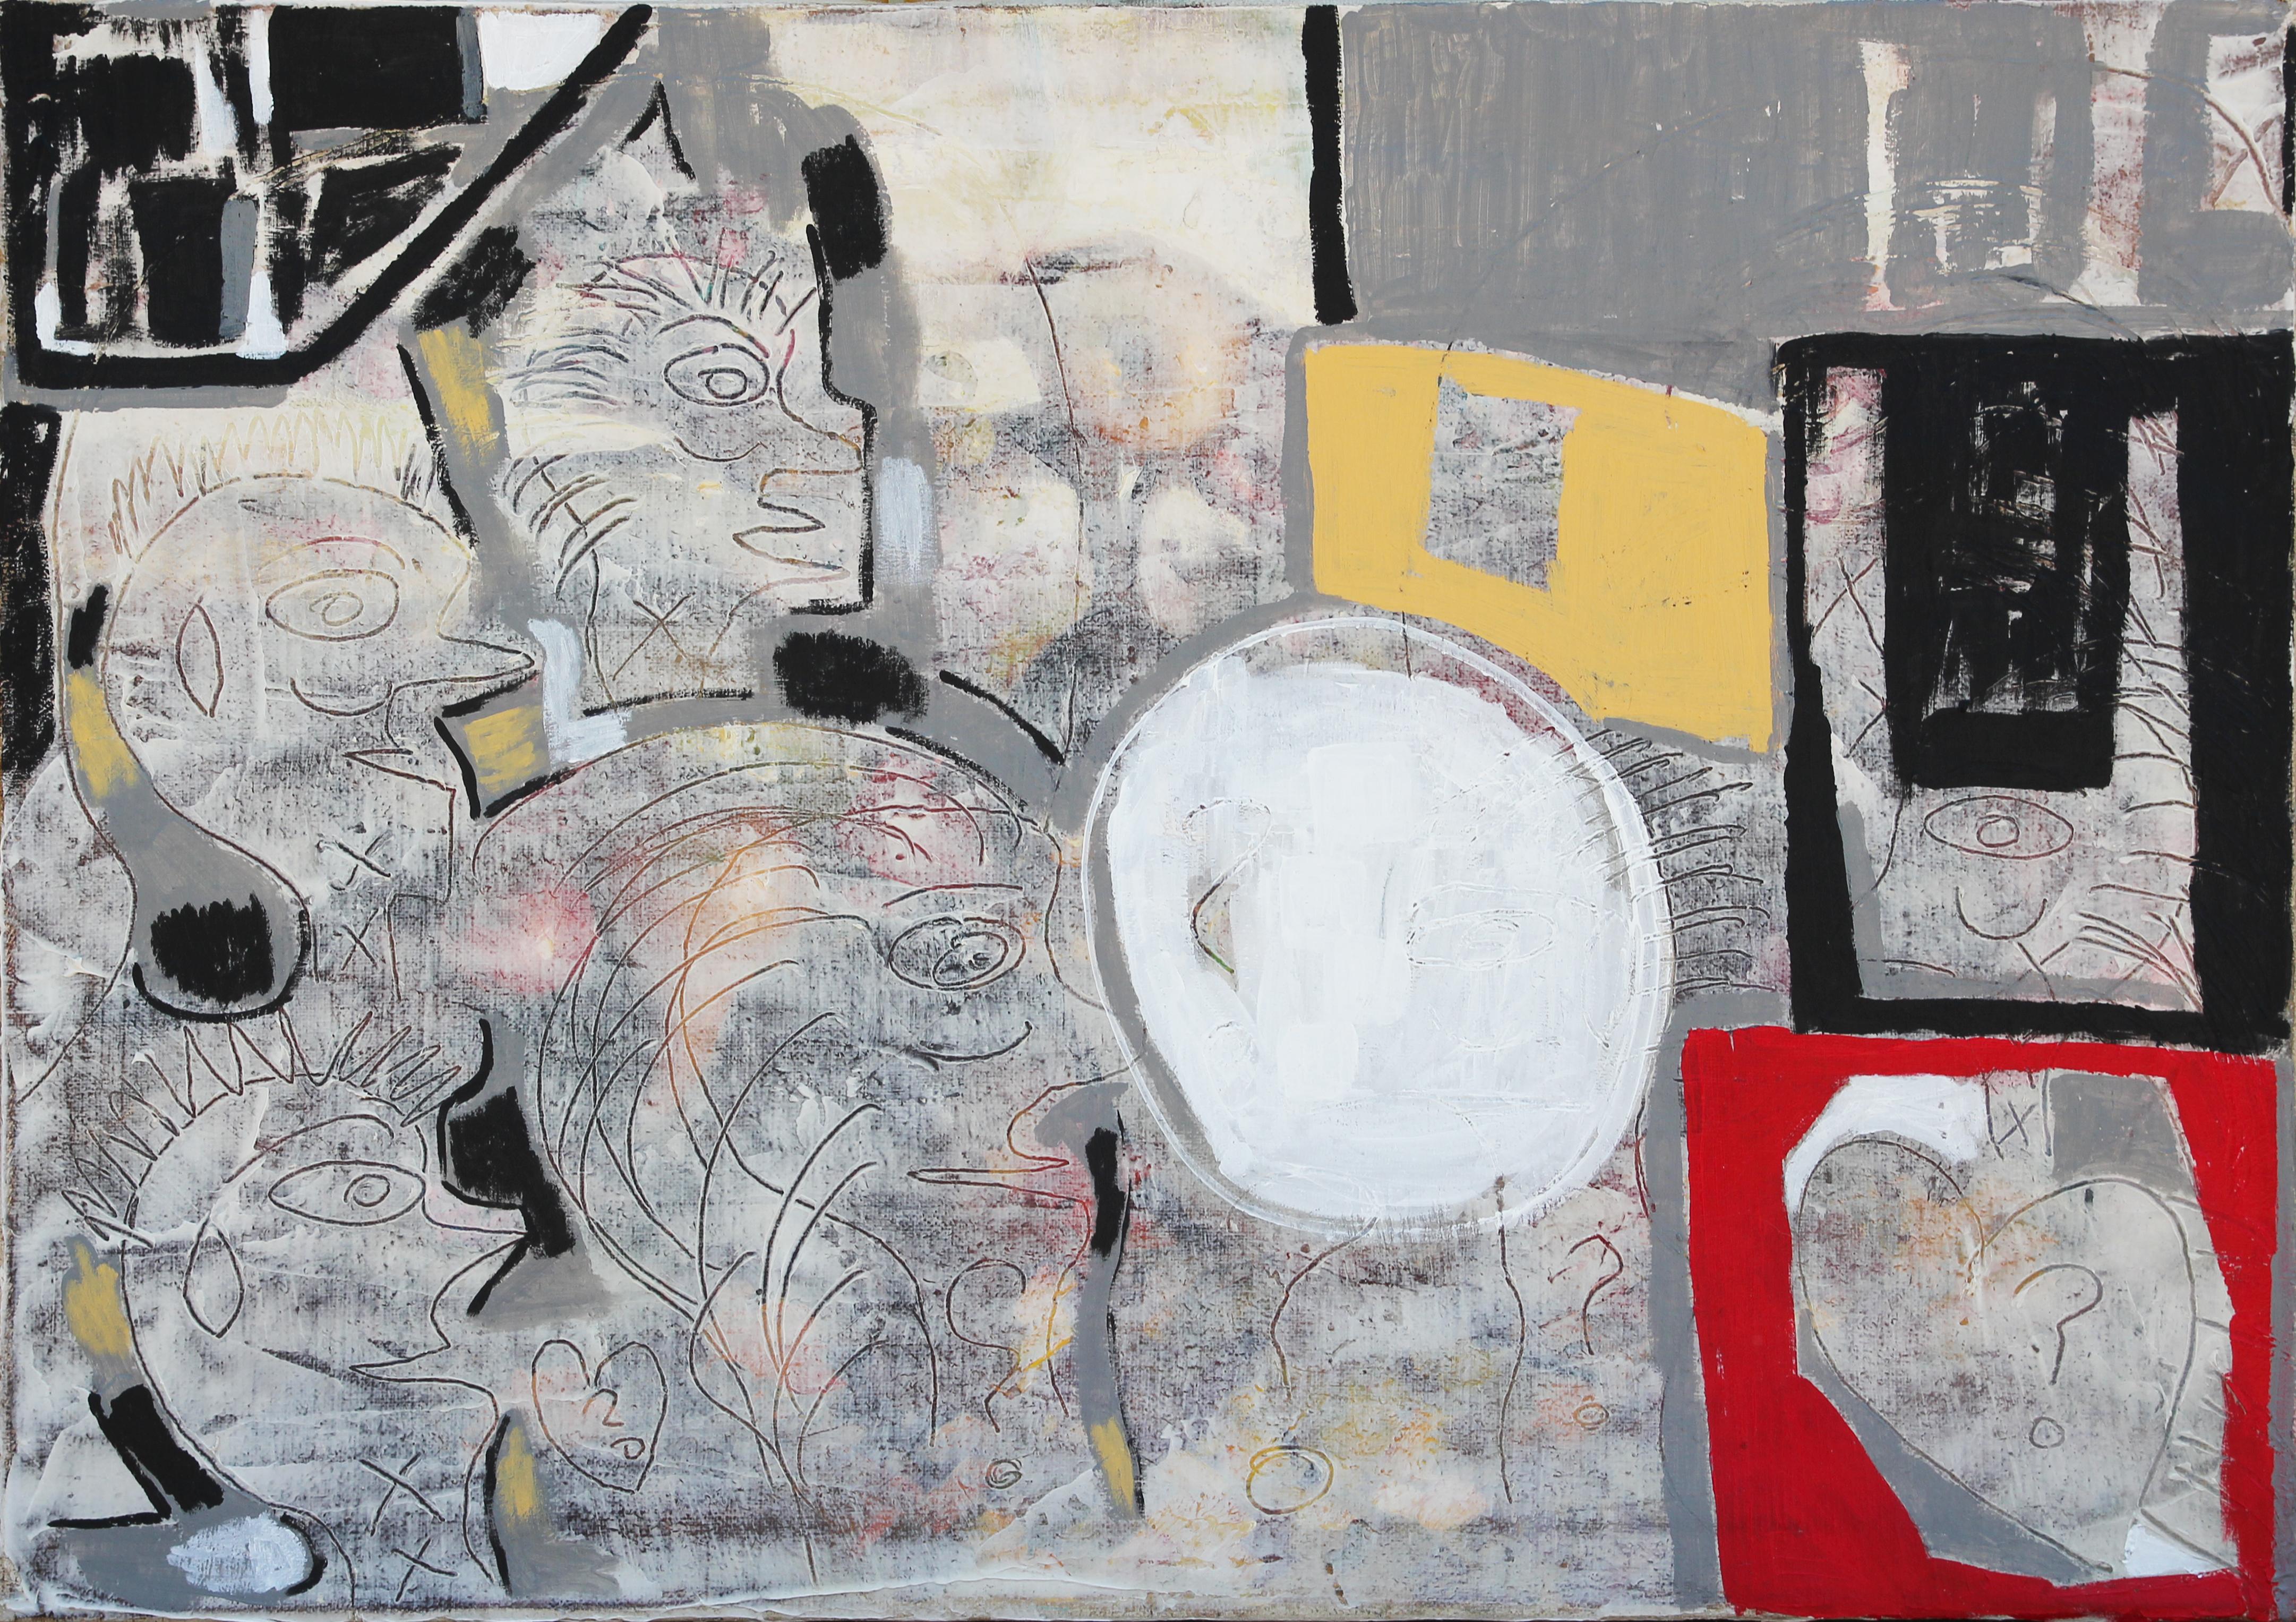 Paul Reeves Abstract Painting - "Luck of the Draw" Gray and Red Abstract Figurative Painting